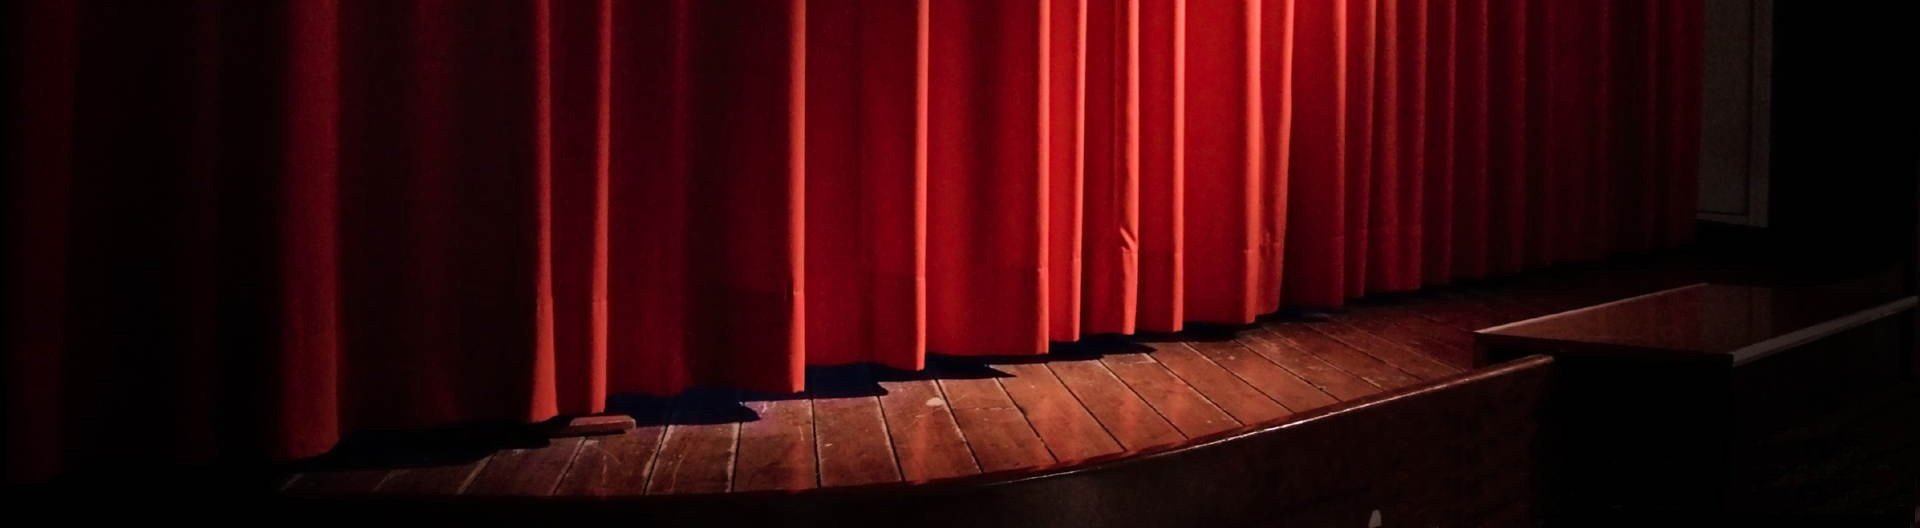 Theater curtains - Manufacturer of theater curtains